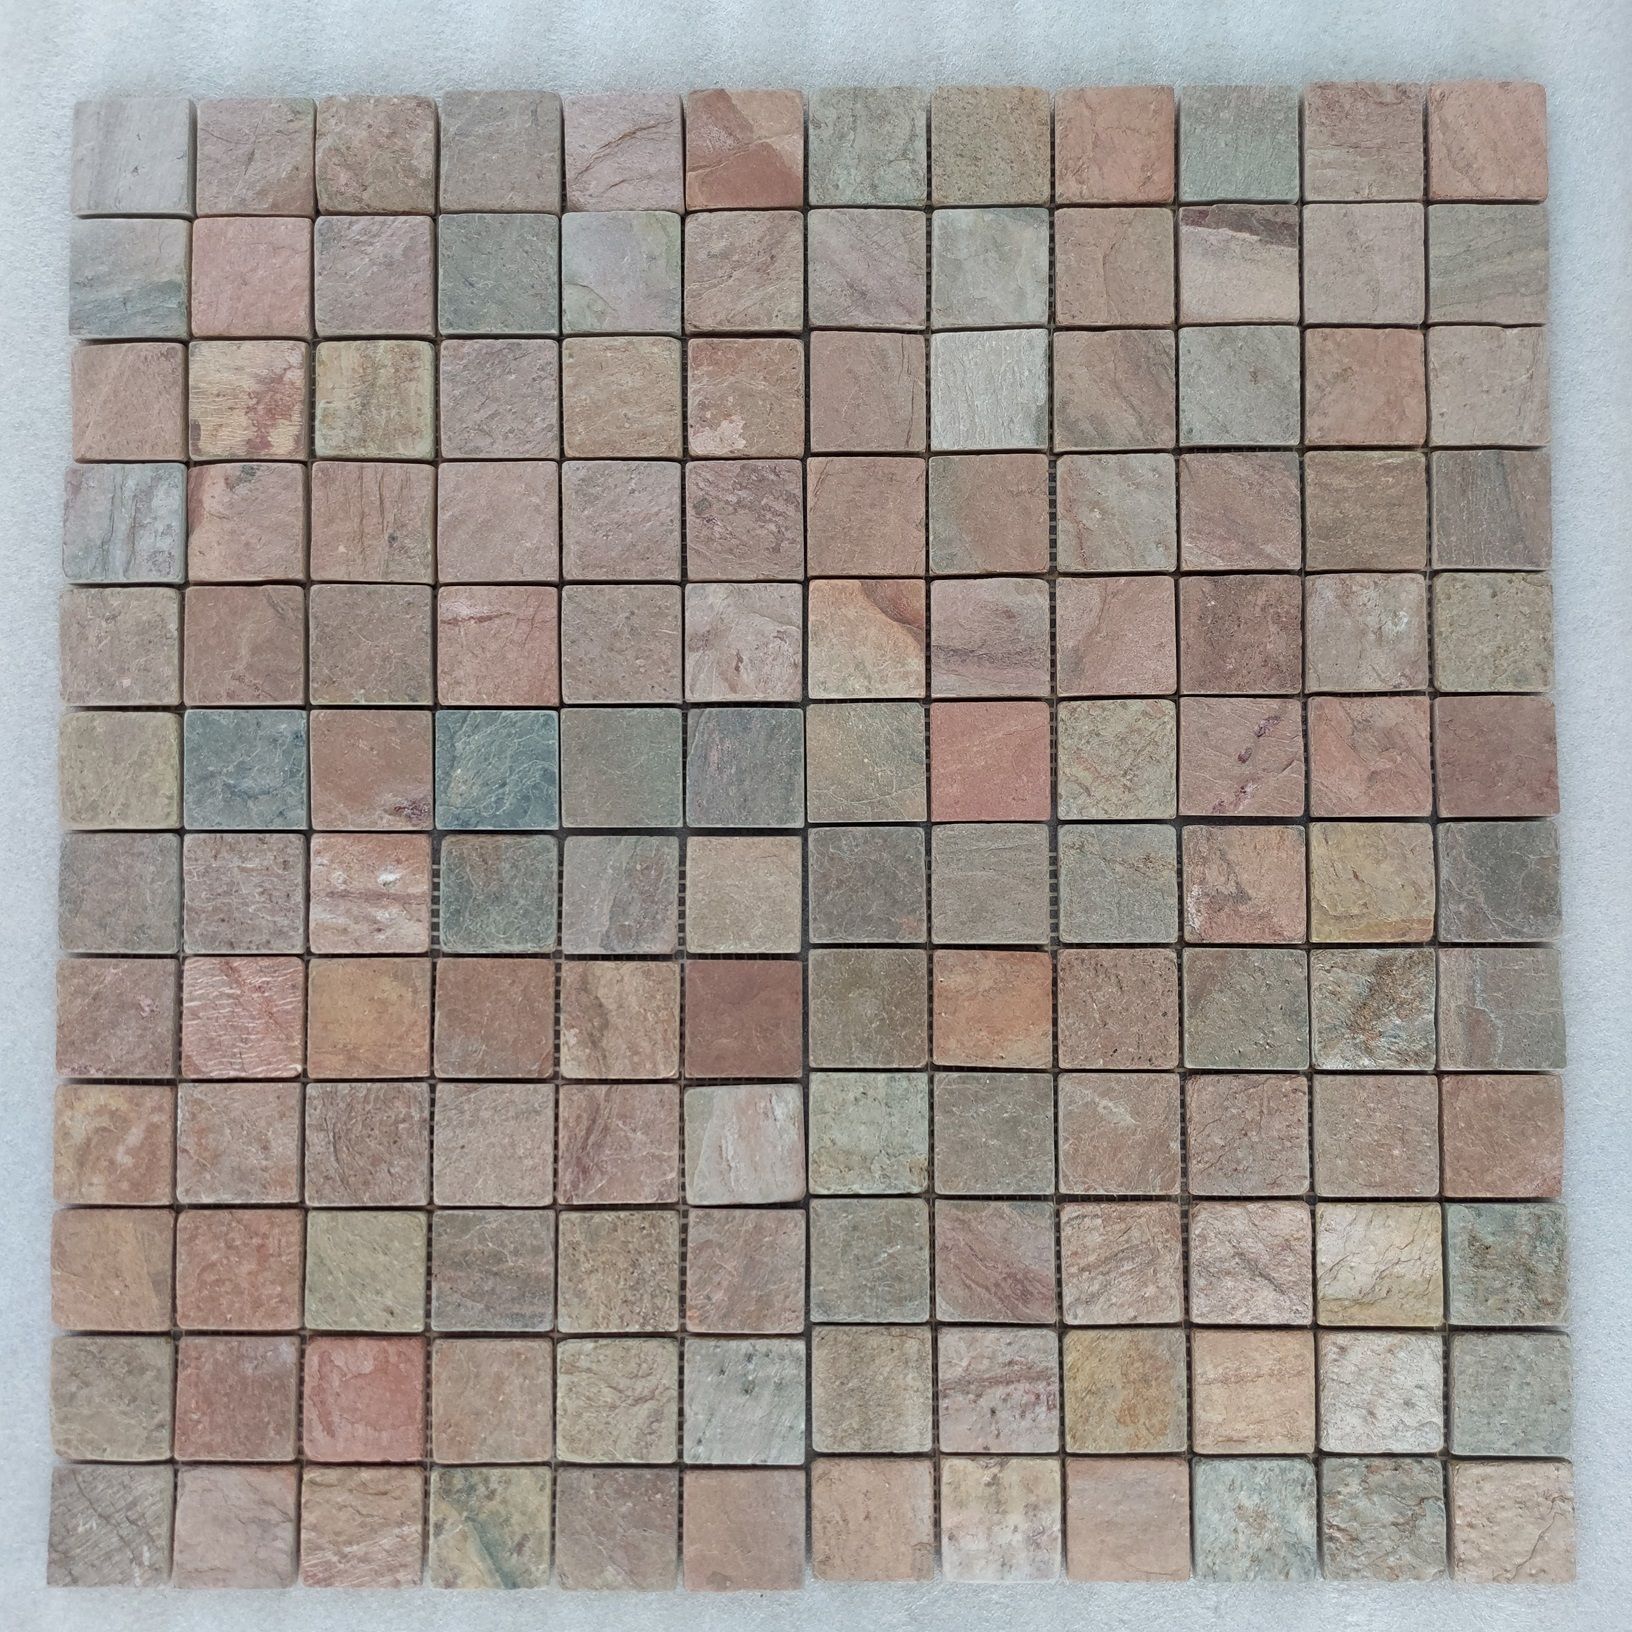 Hot Selling Natural Copper Slate Mosaic Tiles for Kitchen Bathroom Swimming Pool